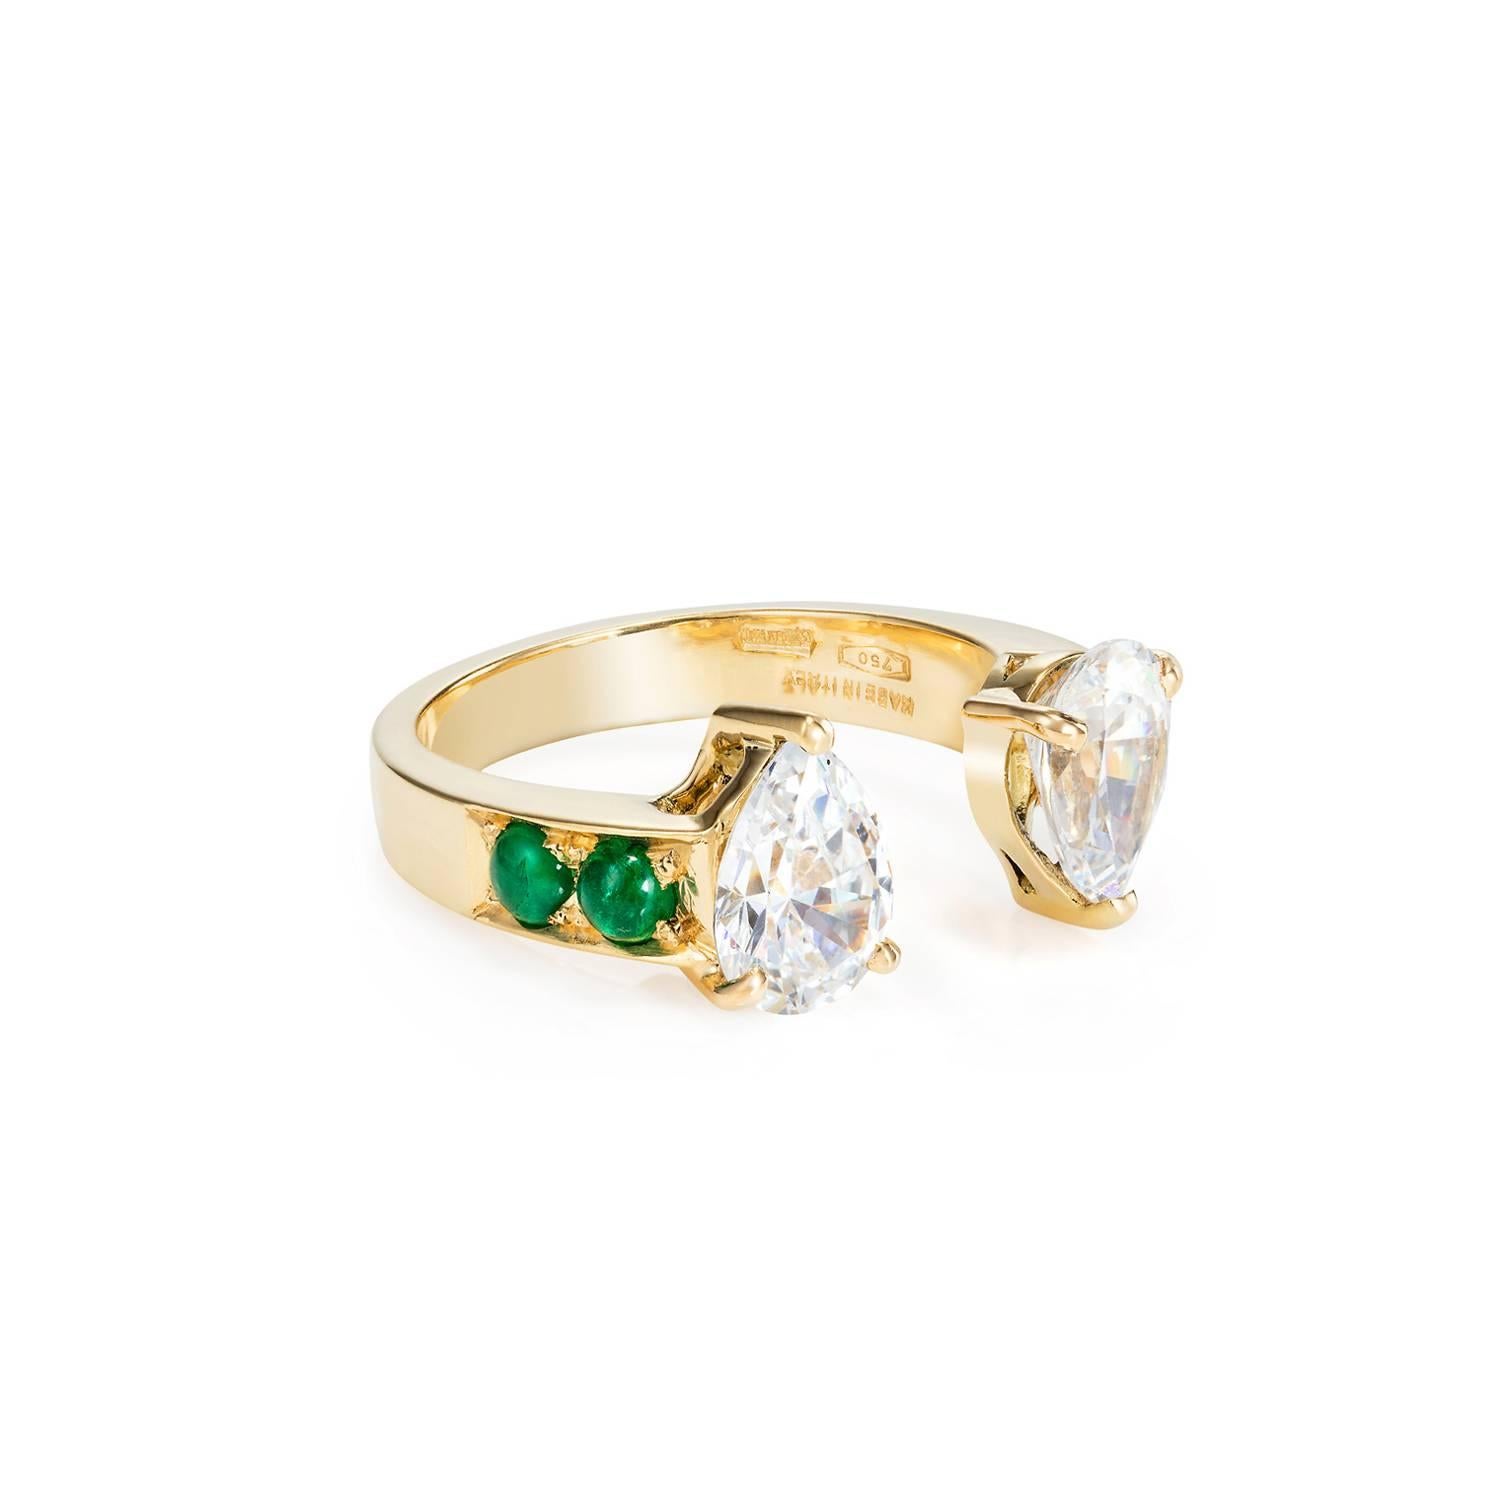 This DUBINI ring from the 'Theodora' collection features zircon drops with emerald cabochons set in 18K yellow gold.

Ring size available: 52 (US 6) 

The ring may be ordered in any size with a lead time of 2-4 weeks.

Zircons may be substituted